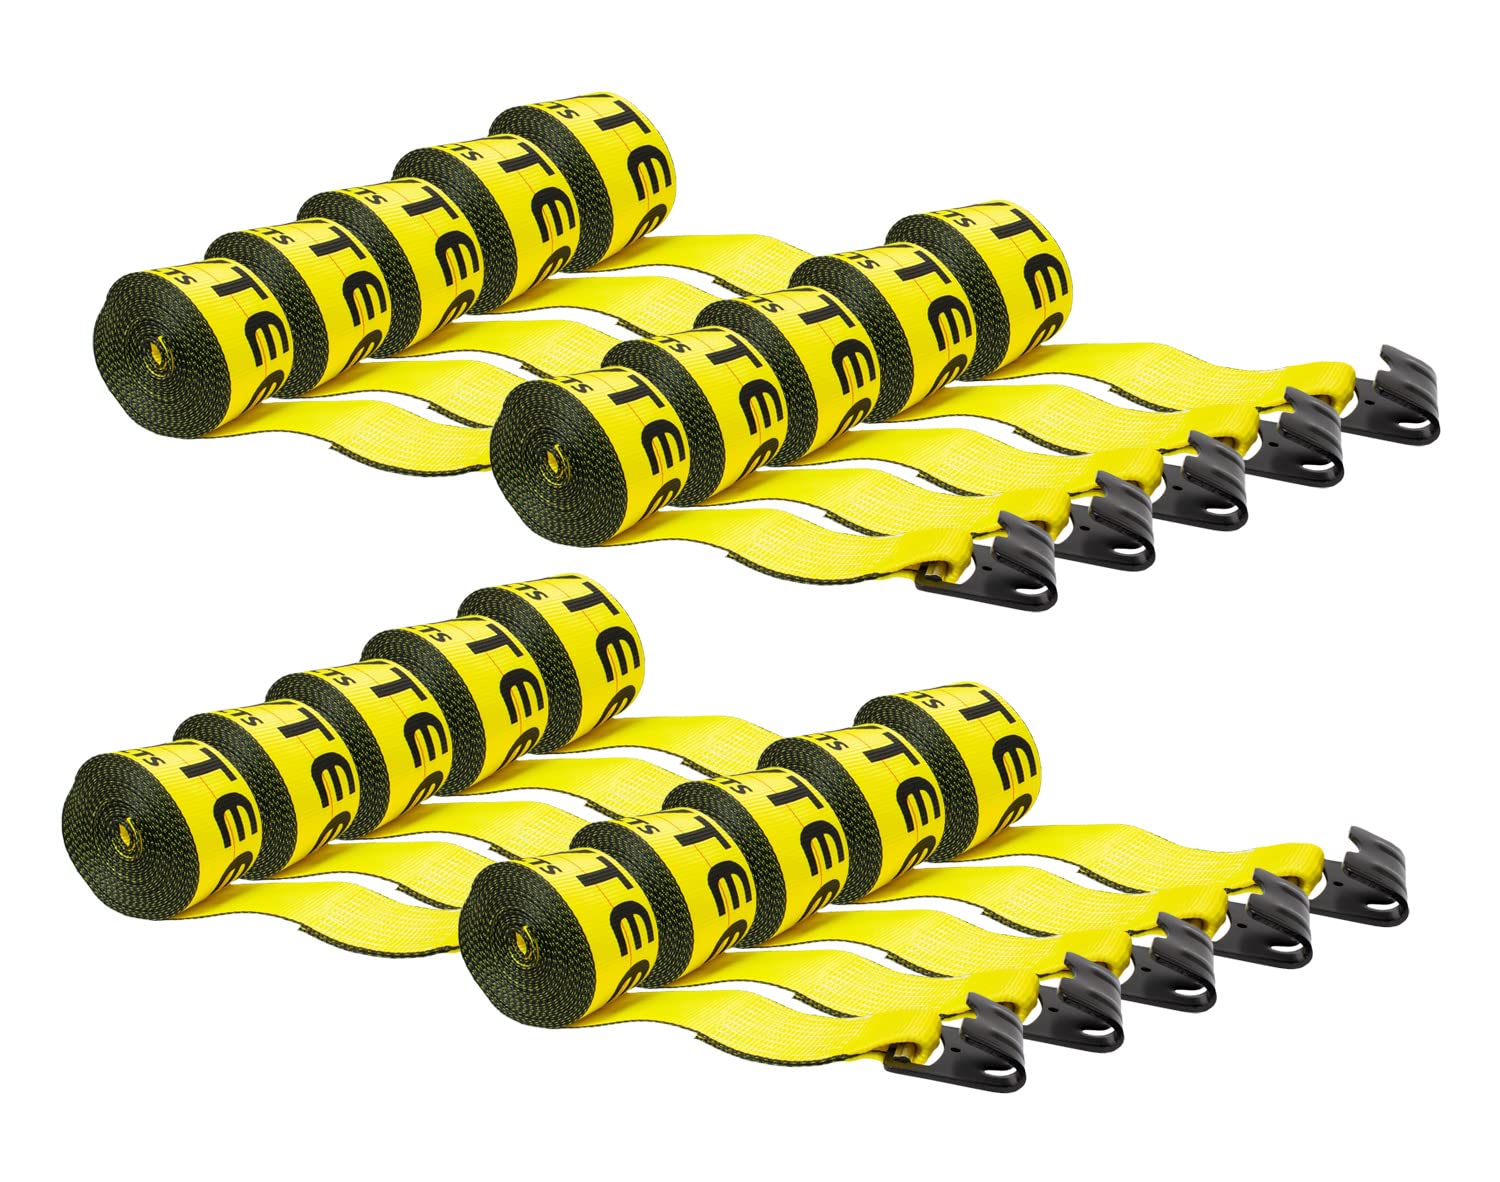 Mytee Products Winch Straps 4 x 30 Yellow Heavy Duty Tie Down wFlat Hook WLL# 5400 lbs 4 Inch cargo control for Flatbed Truck Ut